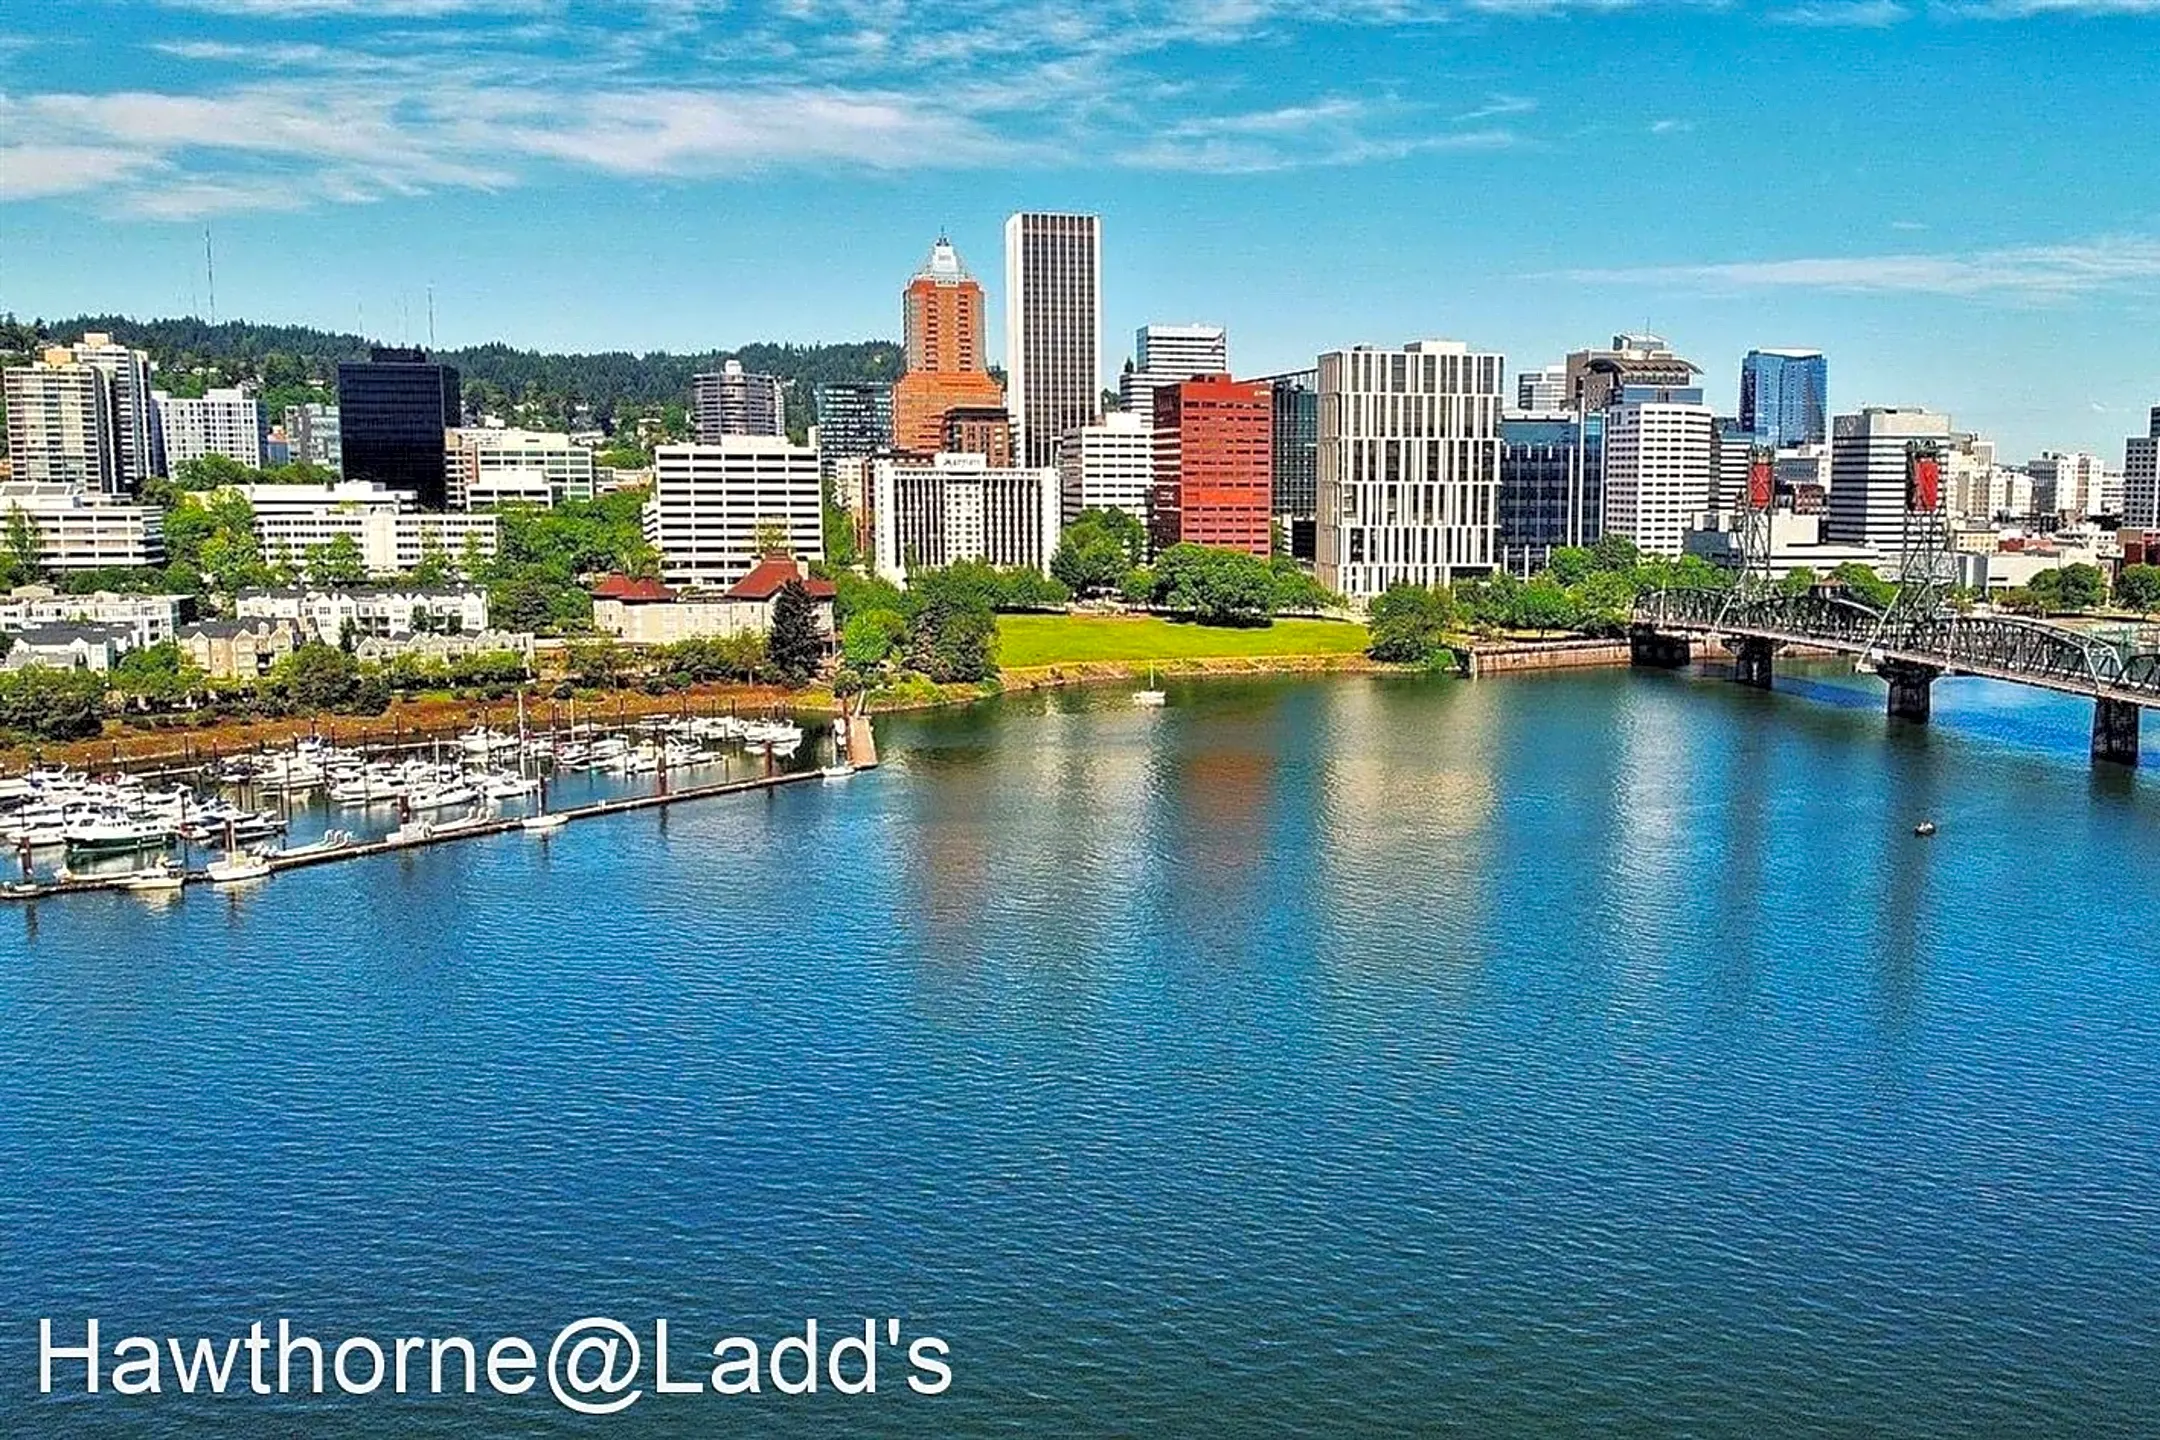 Hawthorne @ Ladd's - 1 & 2 Bedroom Apartment Homes - Portland, OR